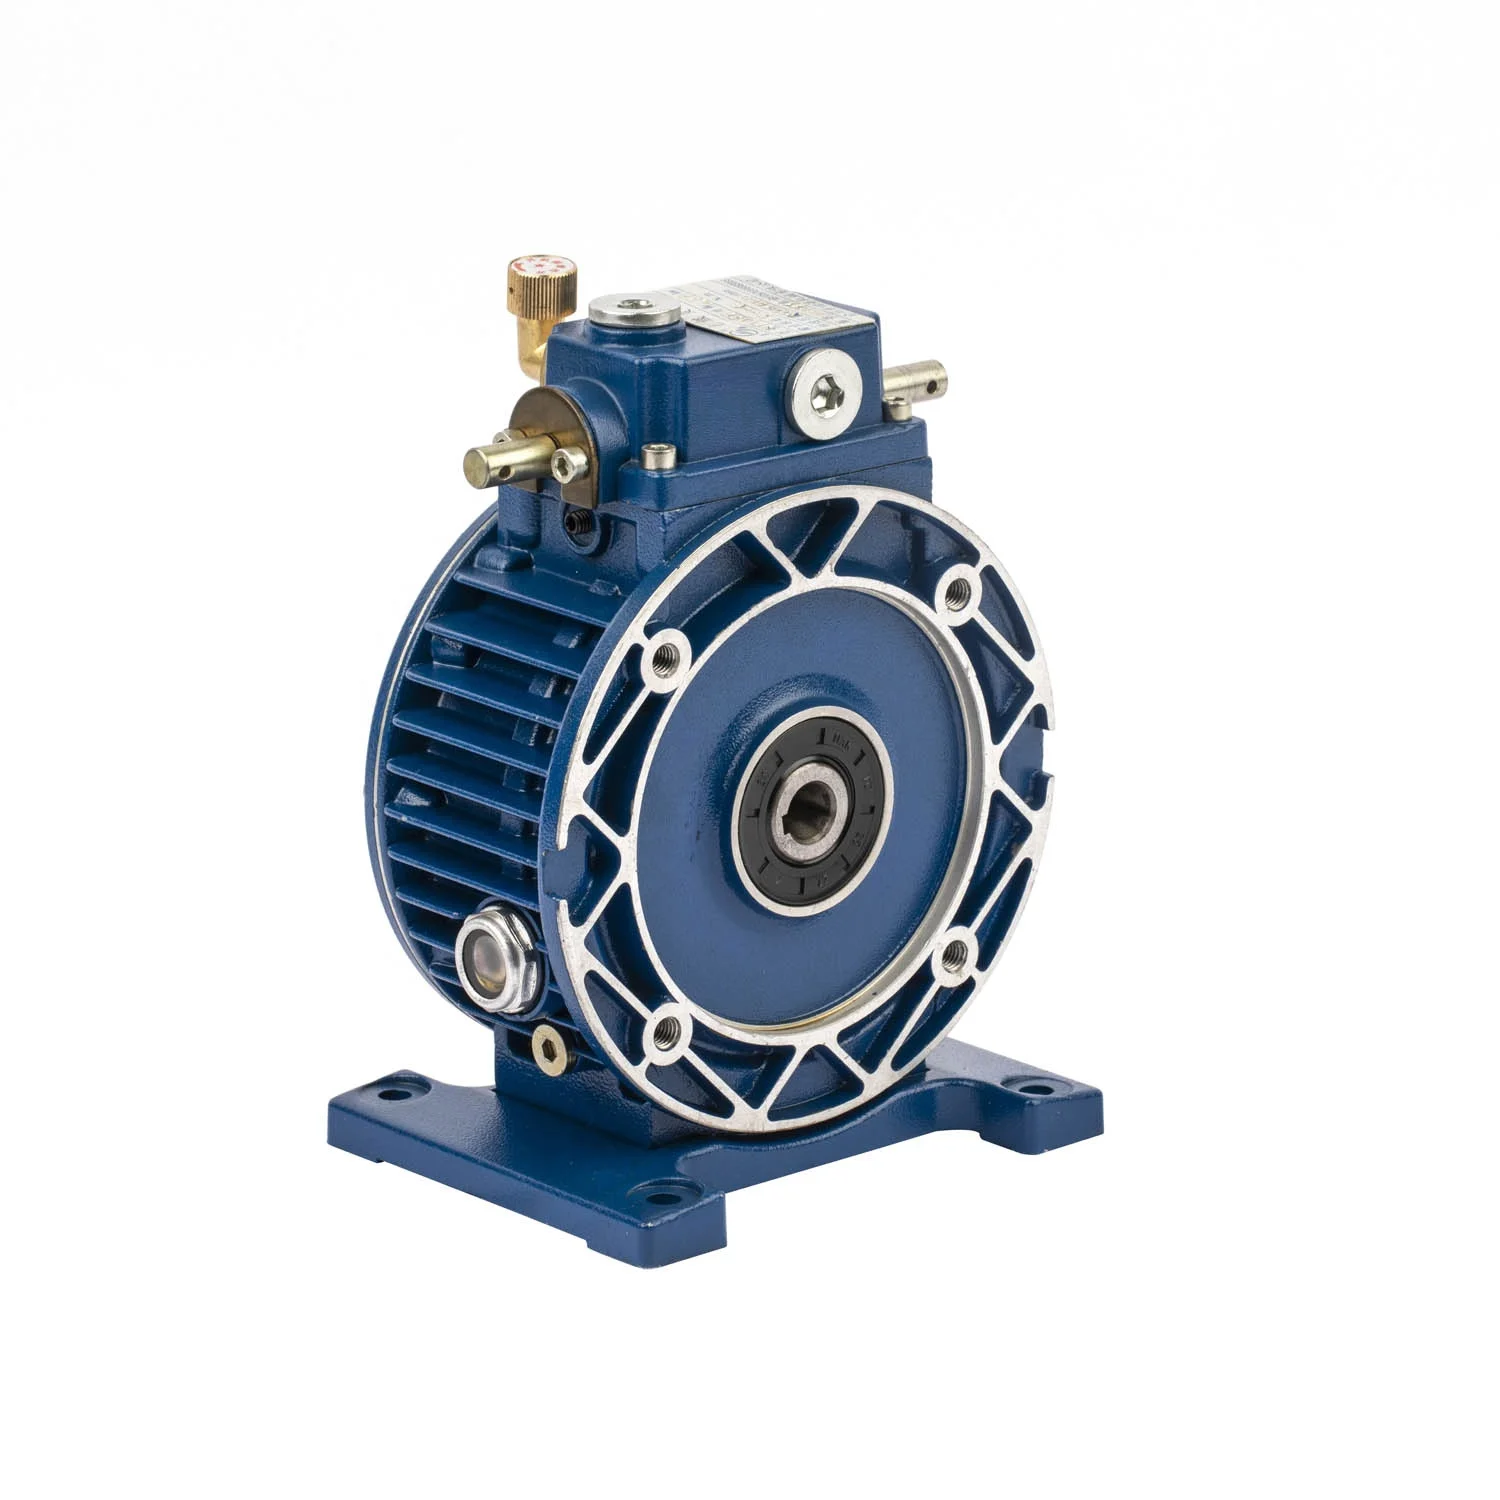 

UDL series Motor Speed variator with foot speed reducer gear box